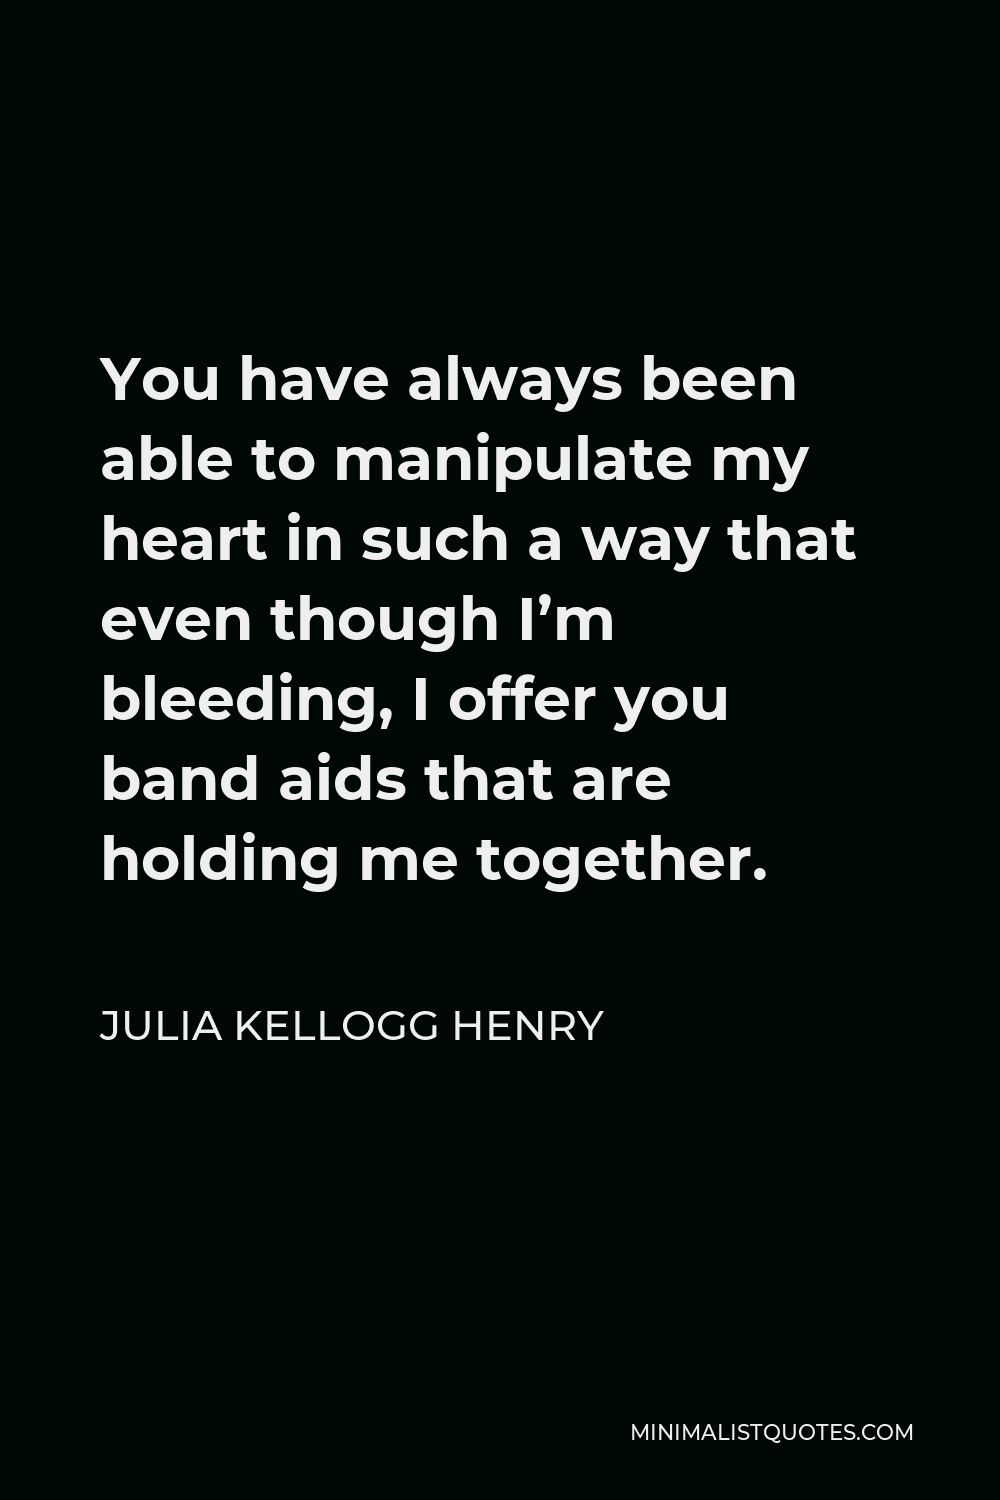 Julia Kellogg Henry Quote - You have always been able to manipulate my heart in such a way that even though I’m bleeding, I offer you band aids that are holding me together.